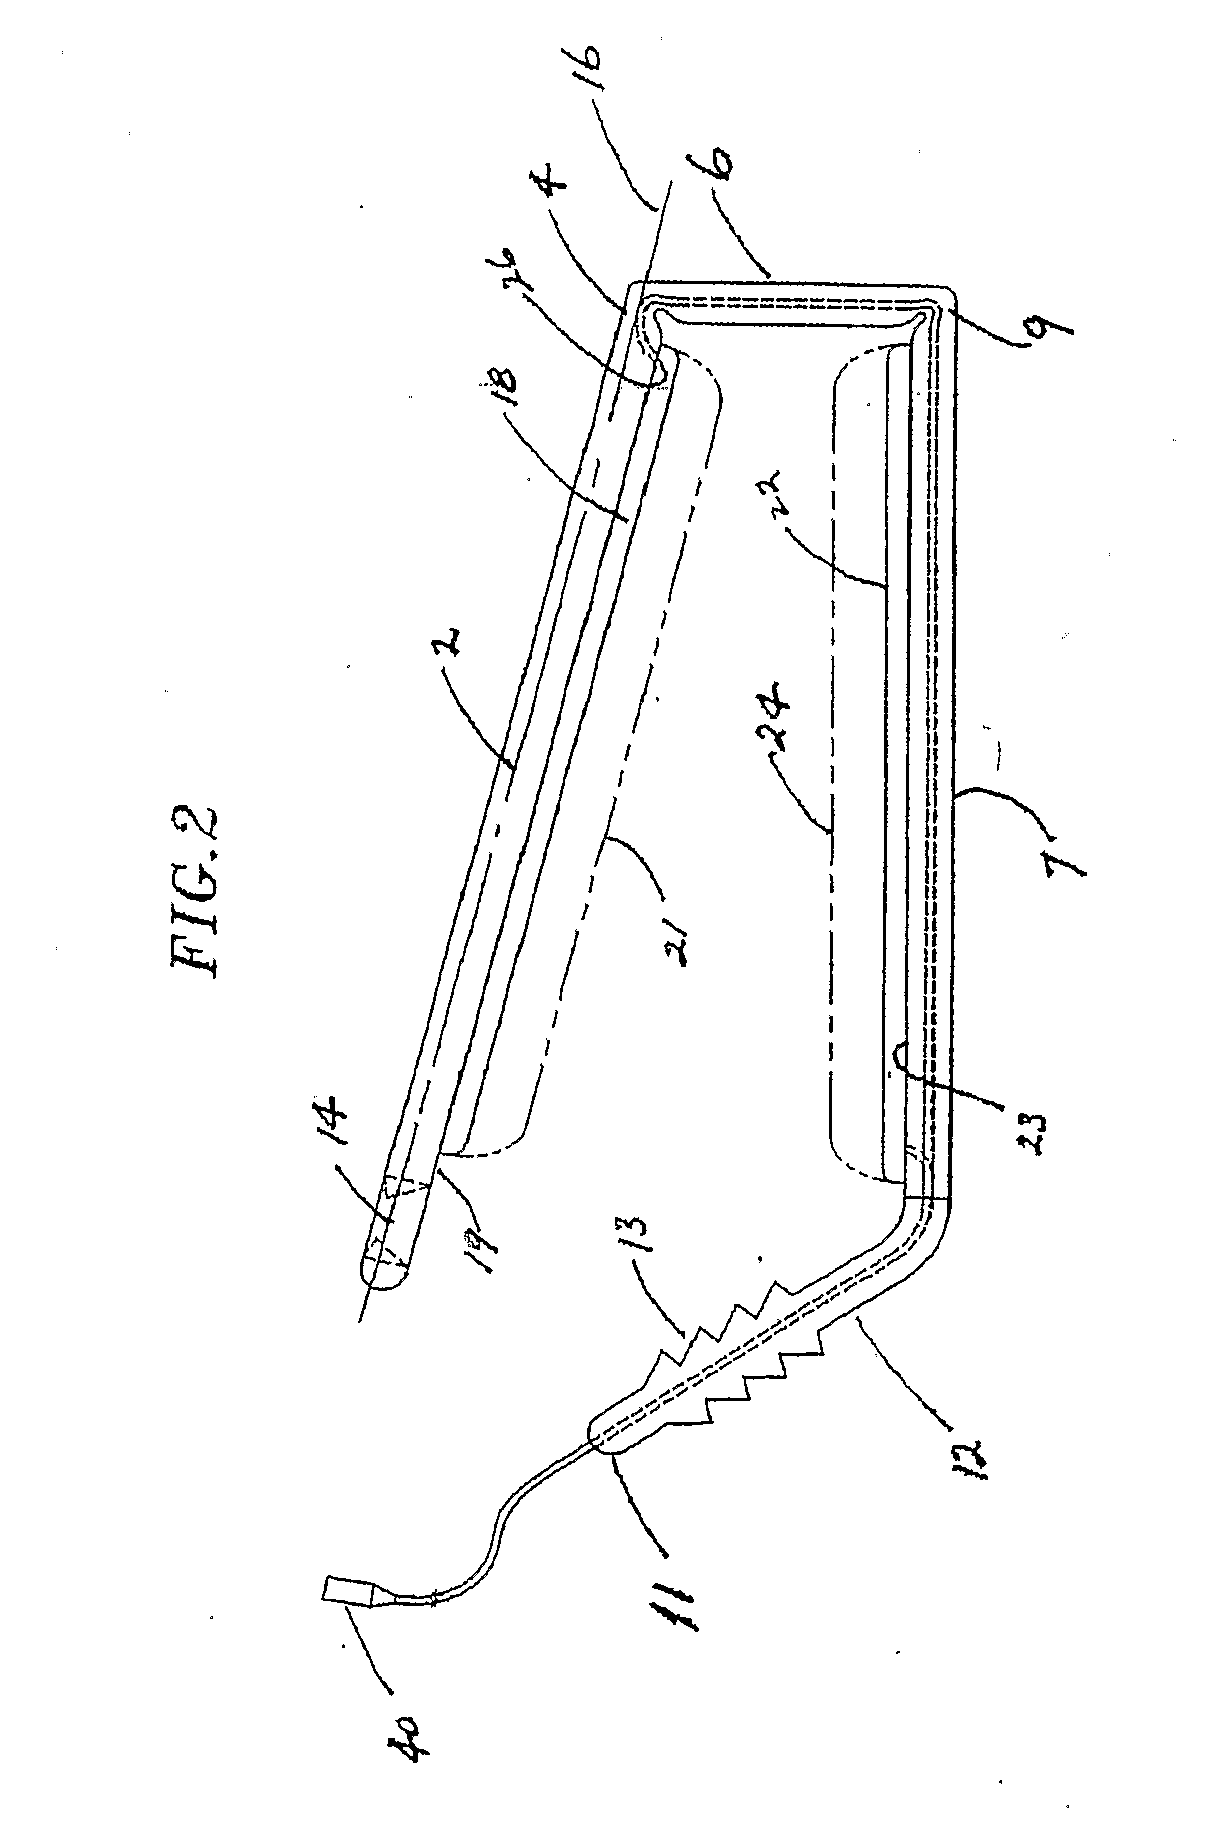 Clamp Device to Plicate the Stomach